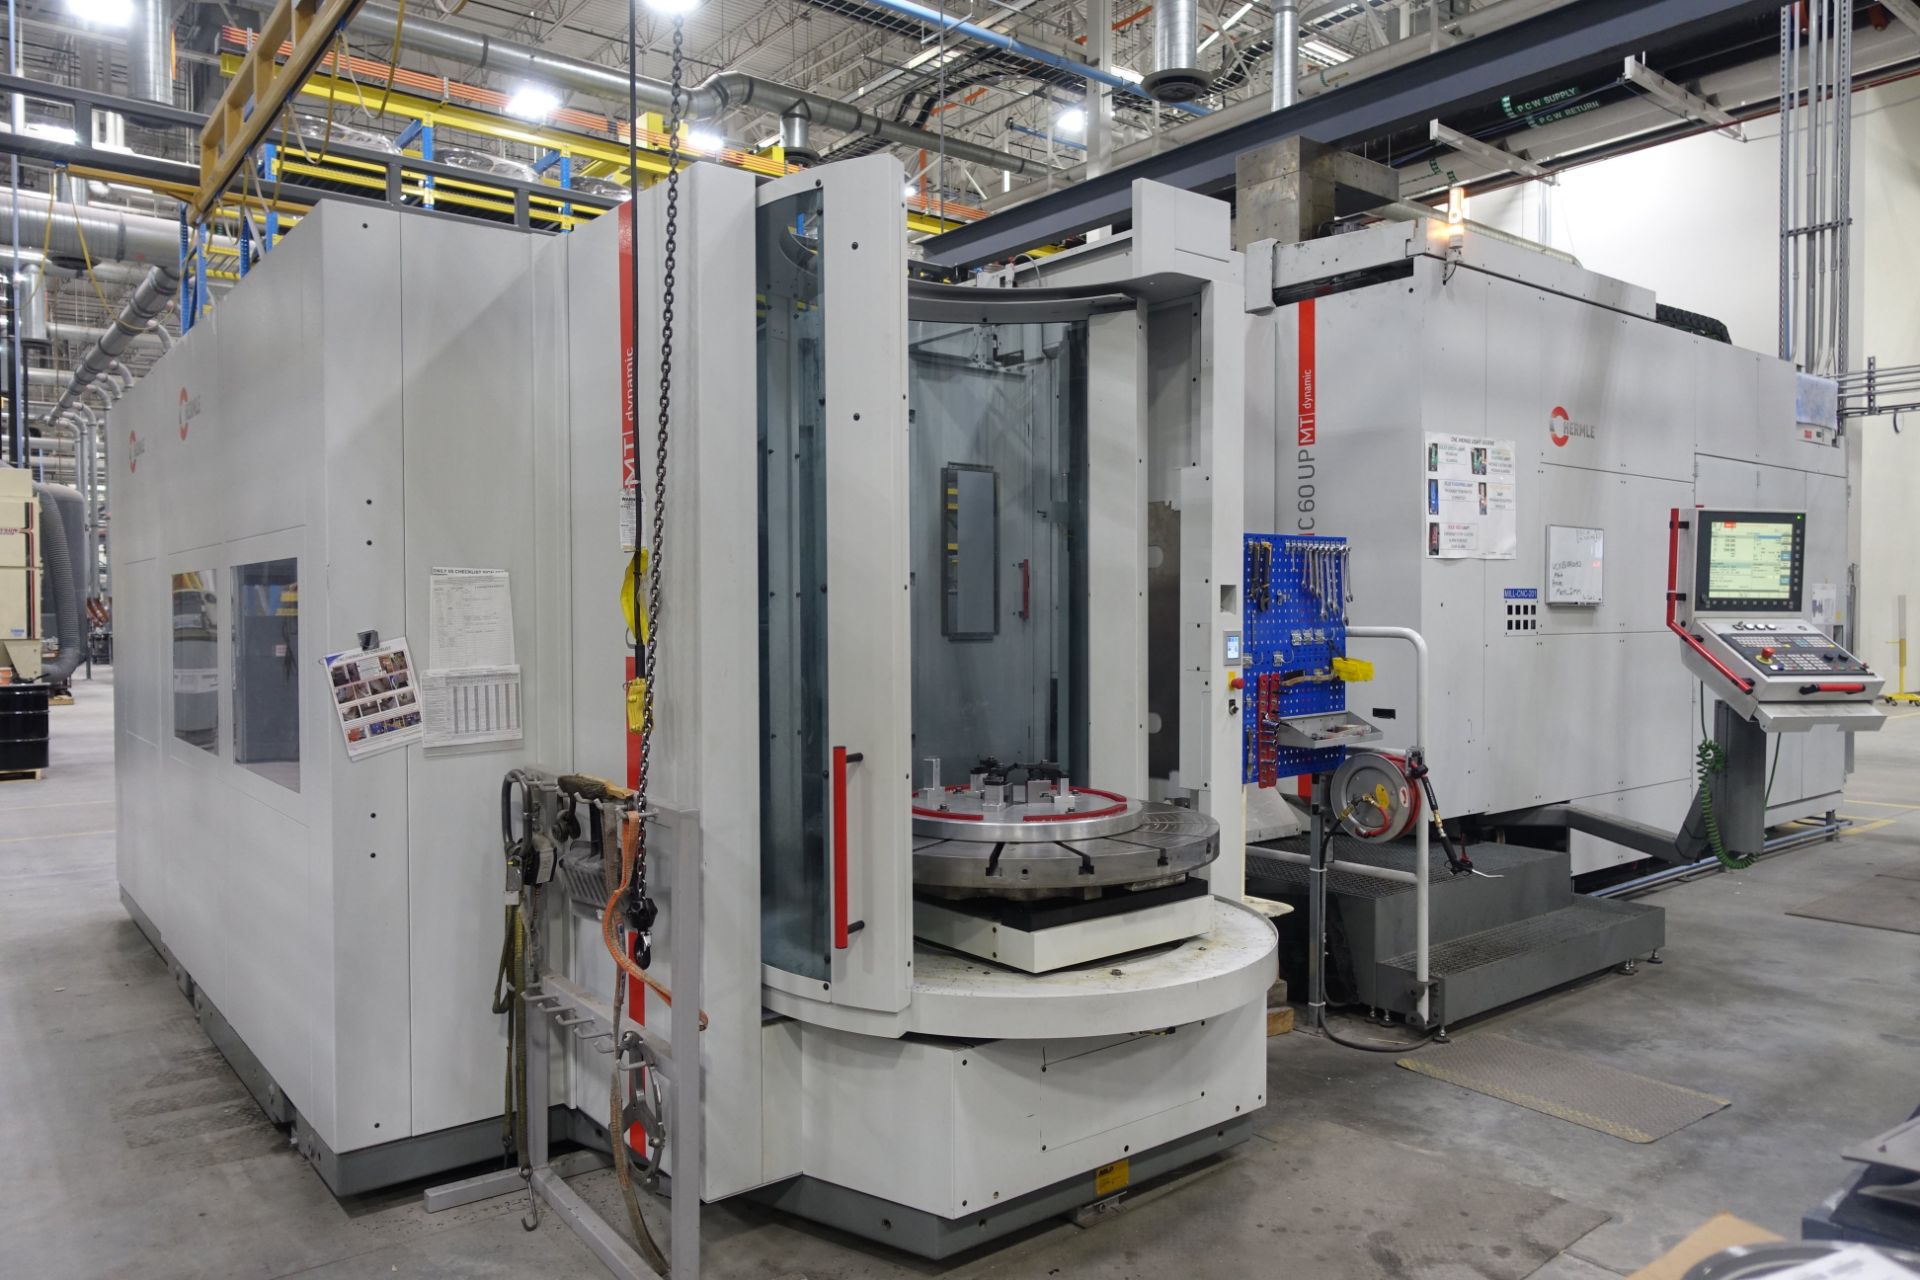 Hermle C60U MT Dynamic 5-Axis CNC Vertical Milling & Turning Center